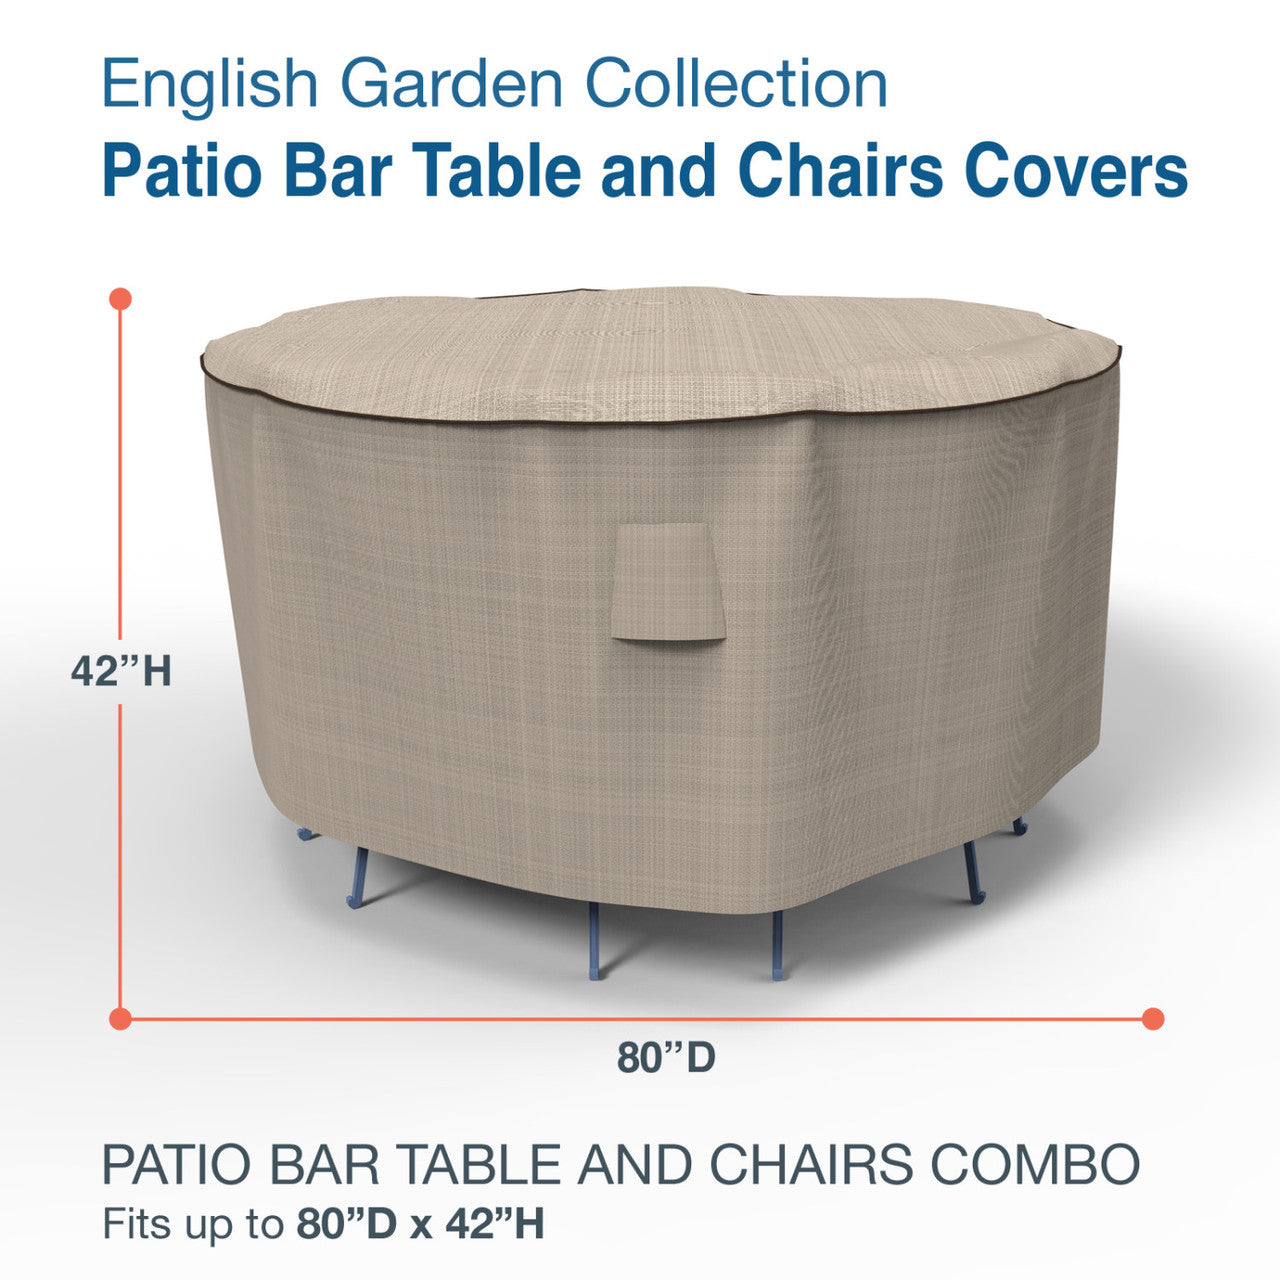 Budge Industries English Garden Patio Barn Table Cover - Large